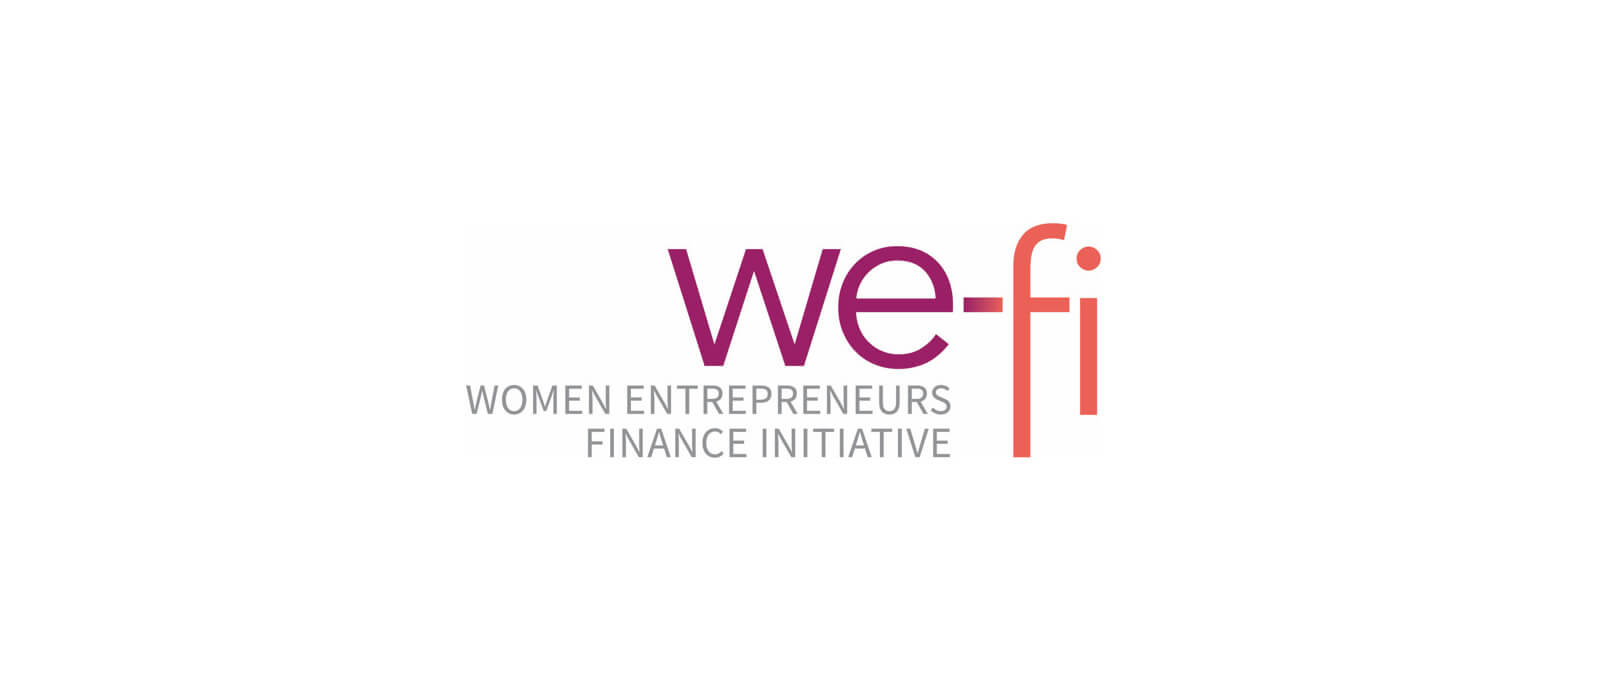 Africana Entrepreneur - We-Fi approves $61.8m fund for women entrepreneurs in Nigeria, others